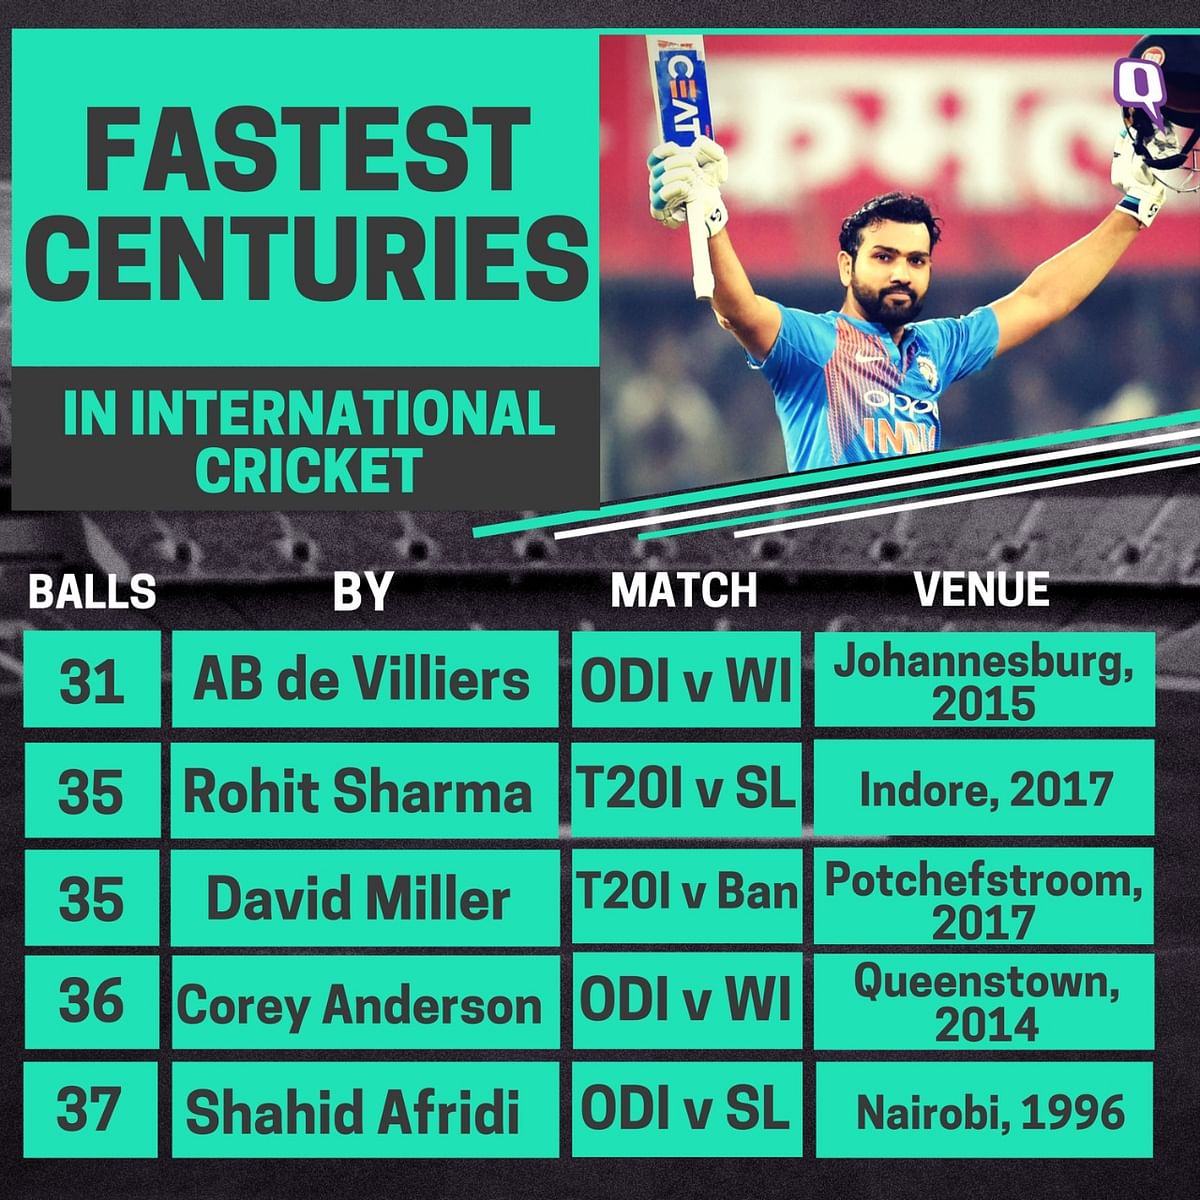 Rohit Sharma took just 35 balls to reach his second T20I century.